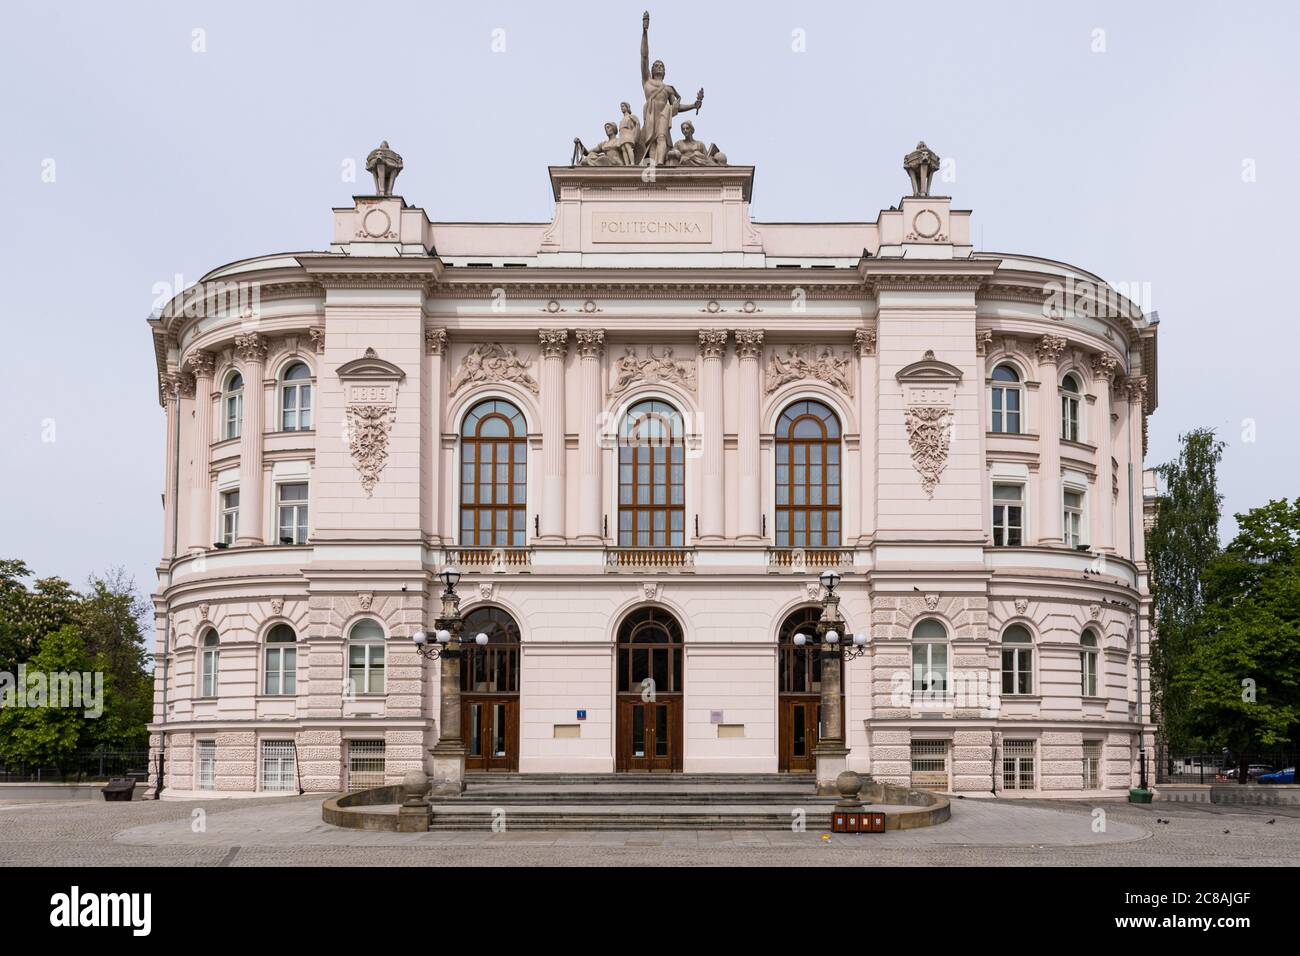 Warsaw, Poland - May 22, 2020: View of the facade of the main building of the Warsaw University of Technology. Stock Photo